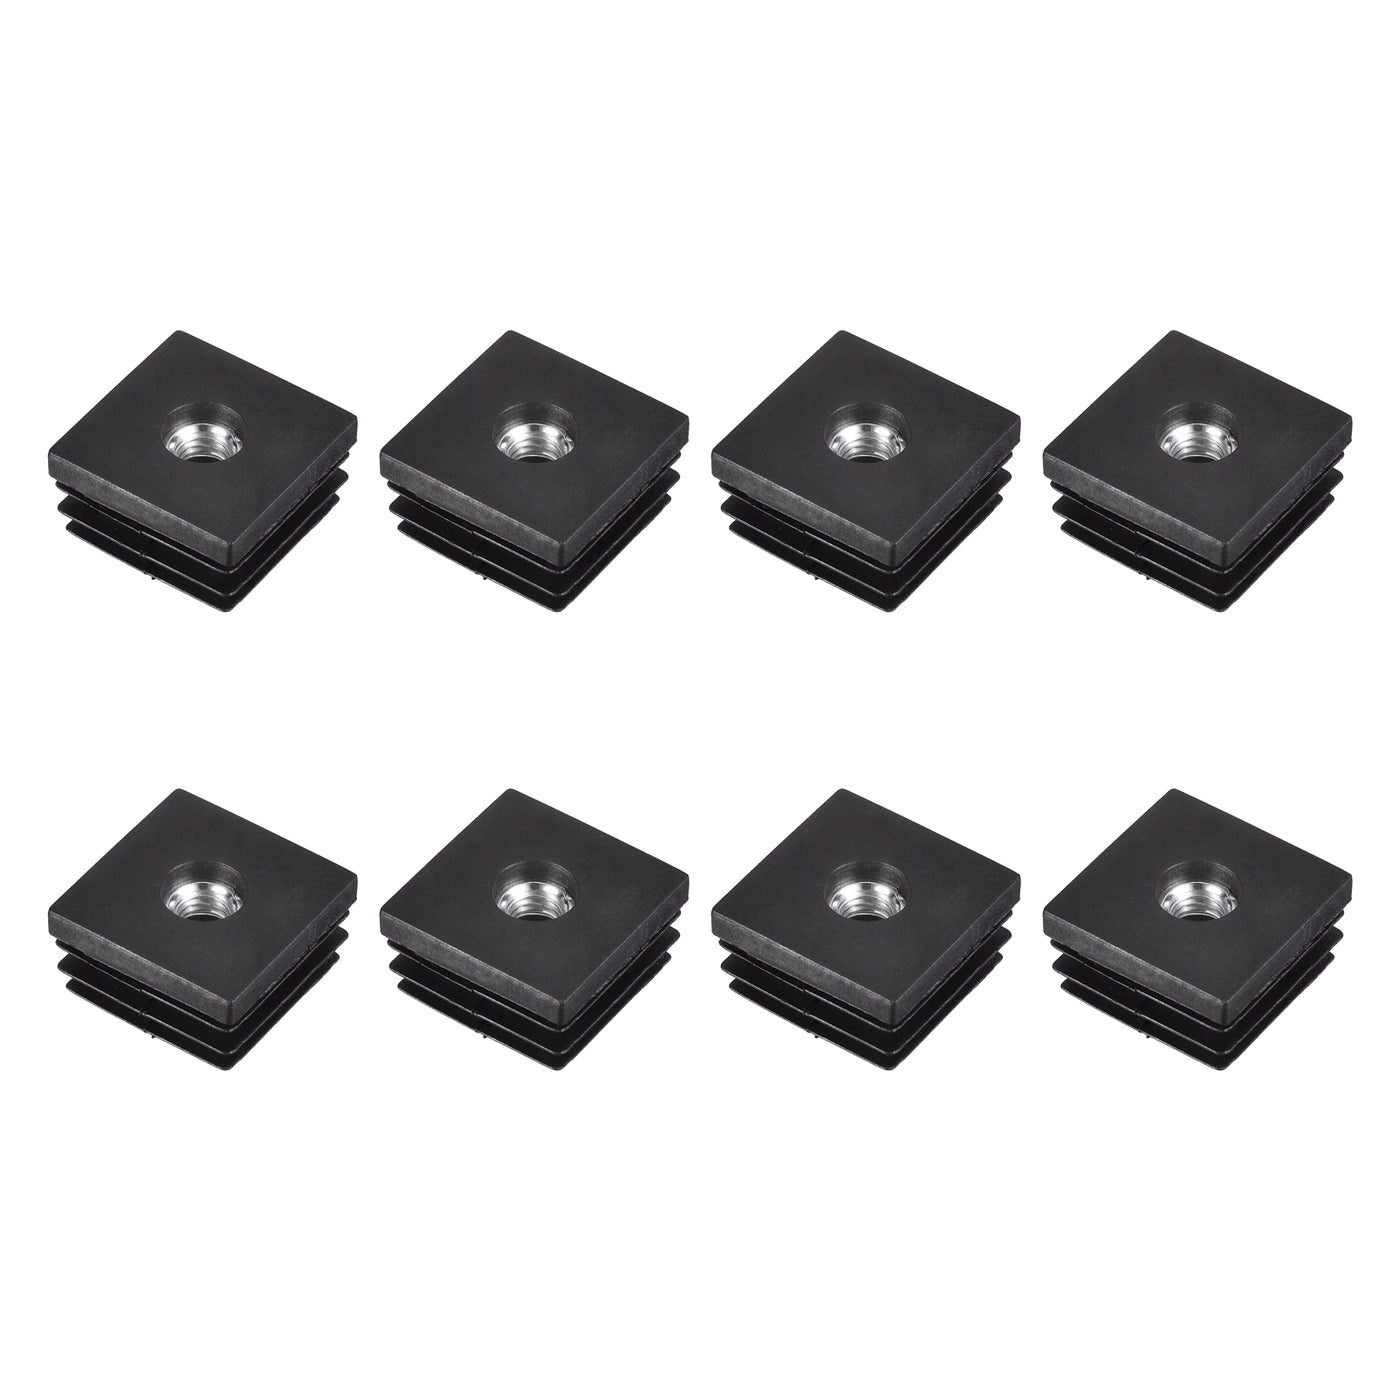 uxcell Uxcell 8Pcs 1.18"x1.18" Caster Insert with Thread, Square M8 Thread for Furniture